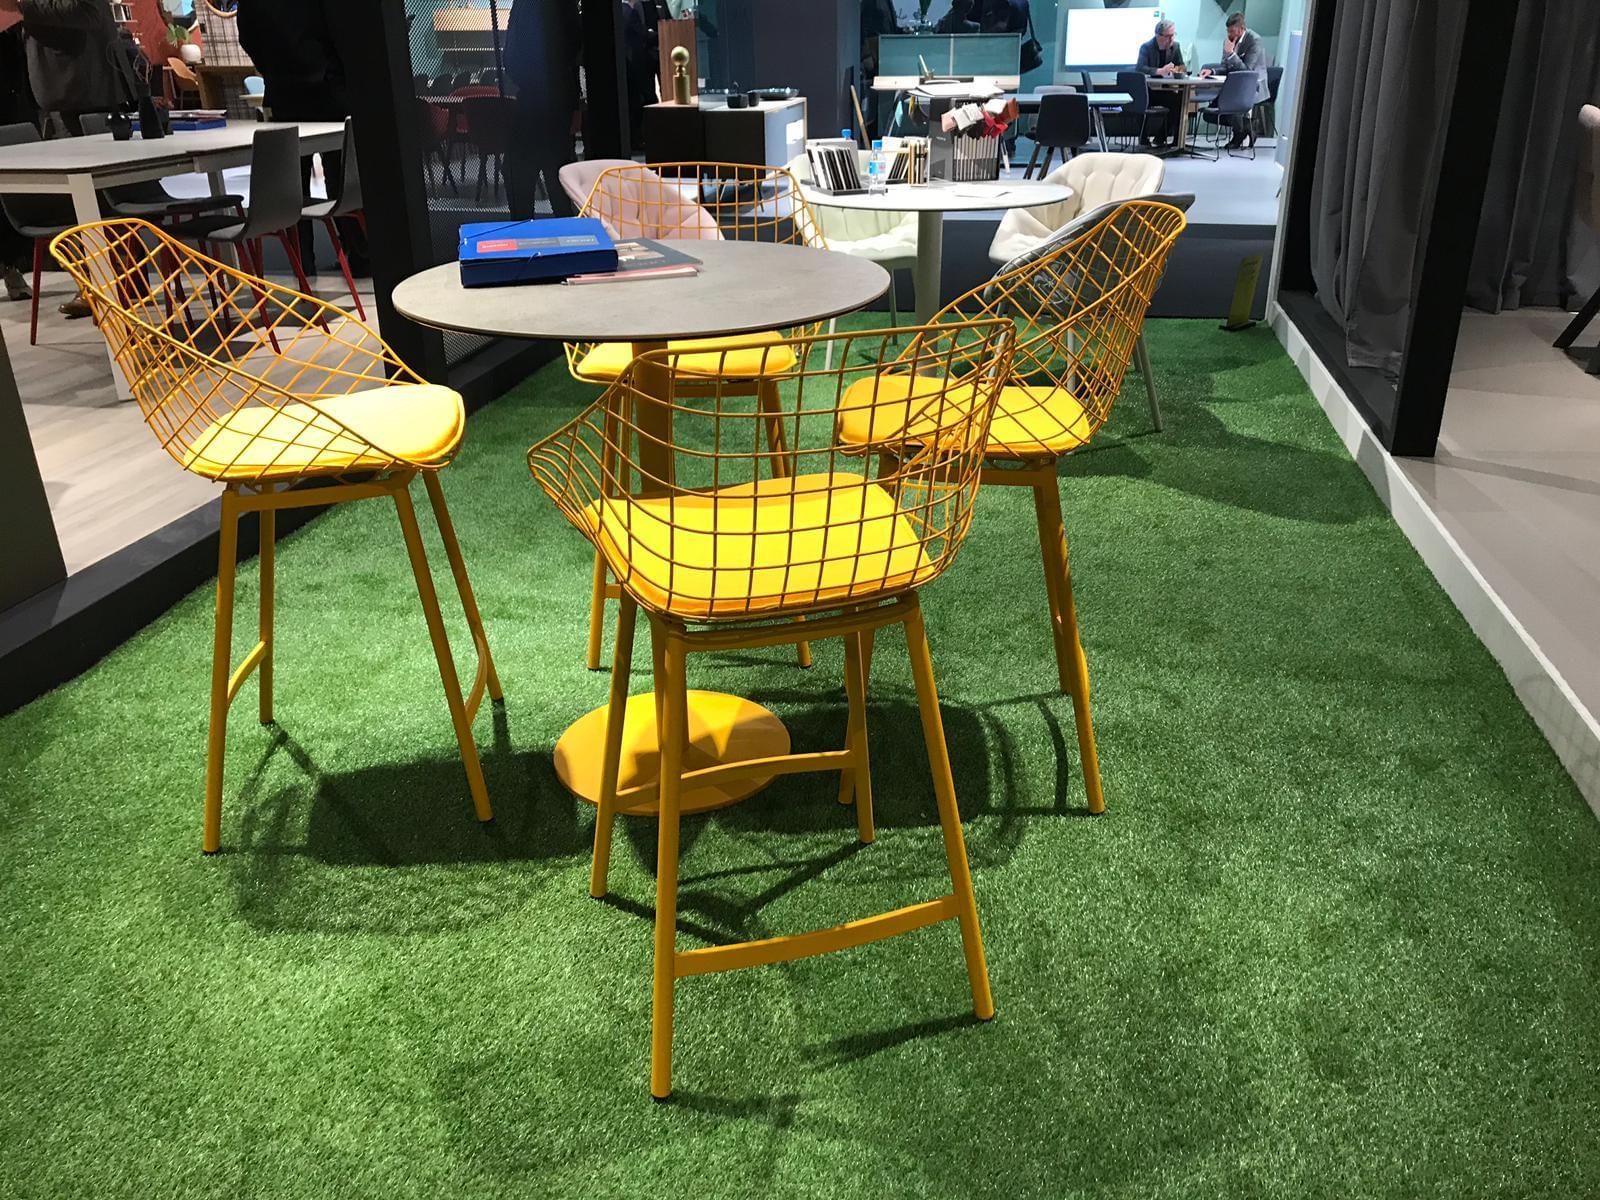 IMM-Cologne-monotone-yellow-outdoor-stools.JPG#asset:180304